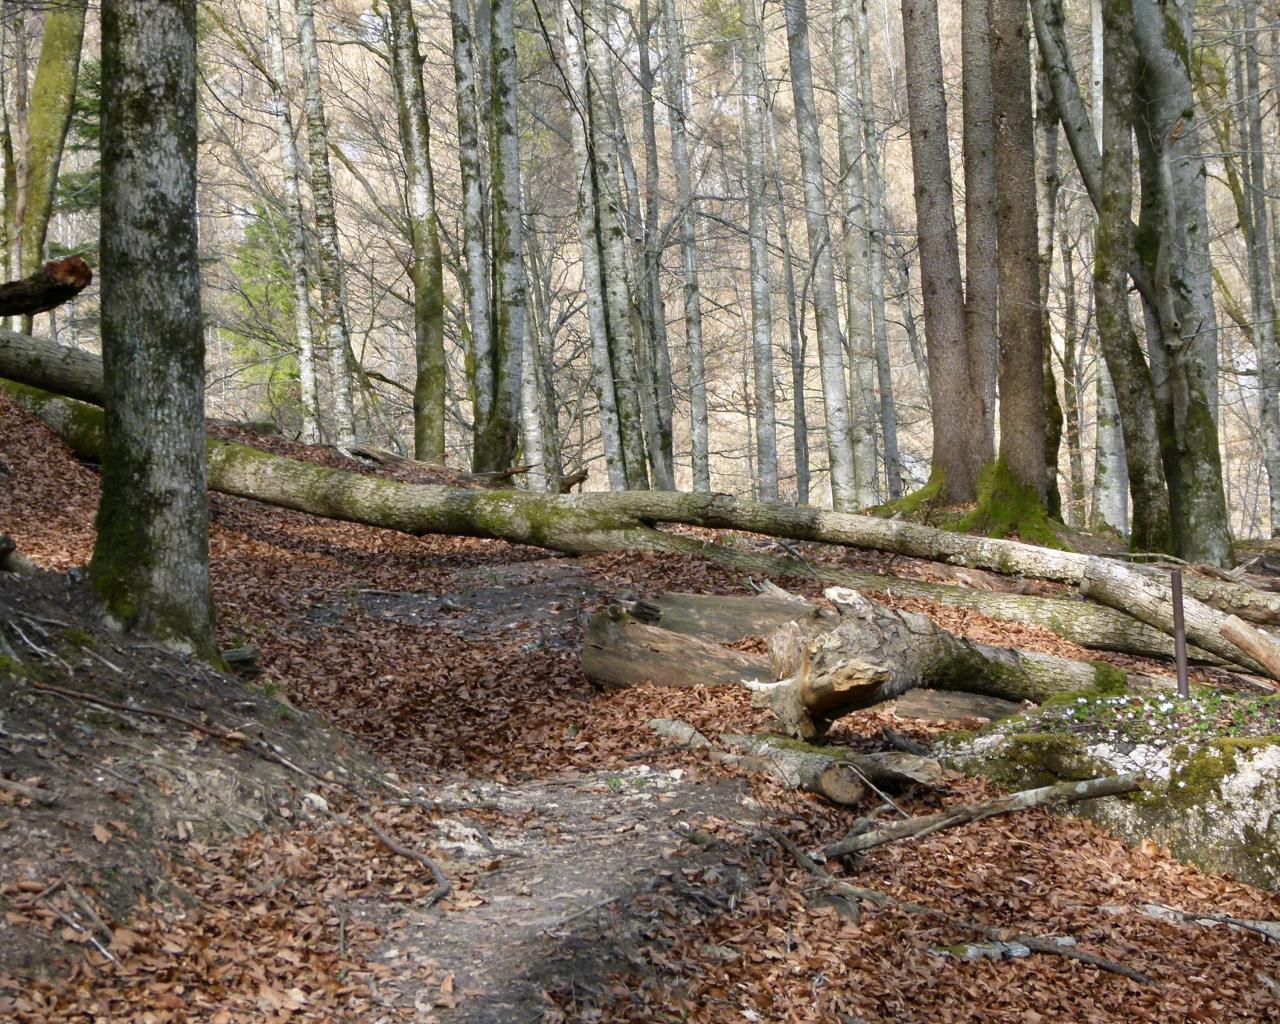 Fallen trees lie across a hiking trail in the forest